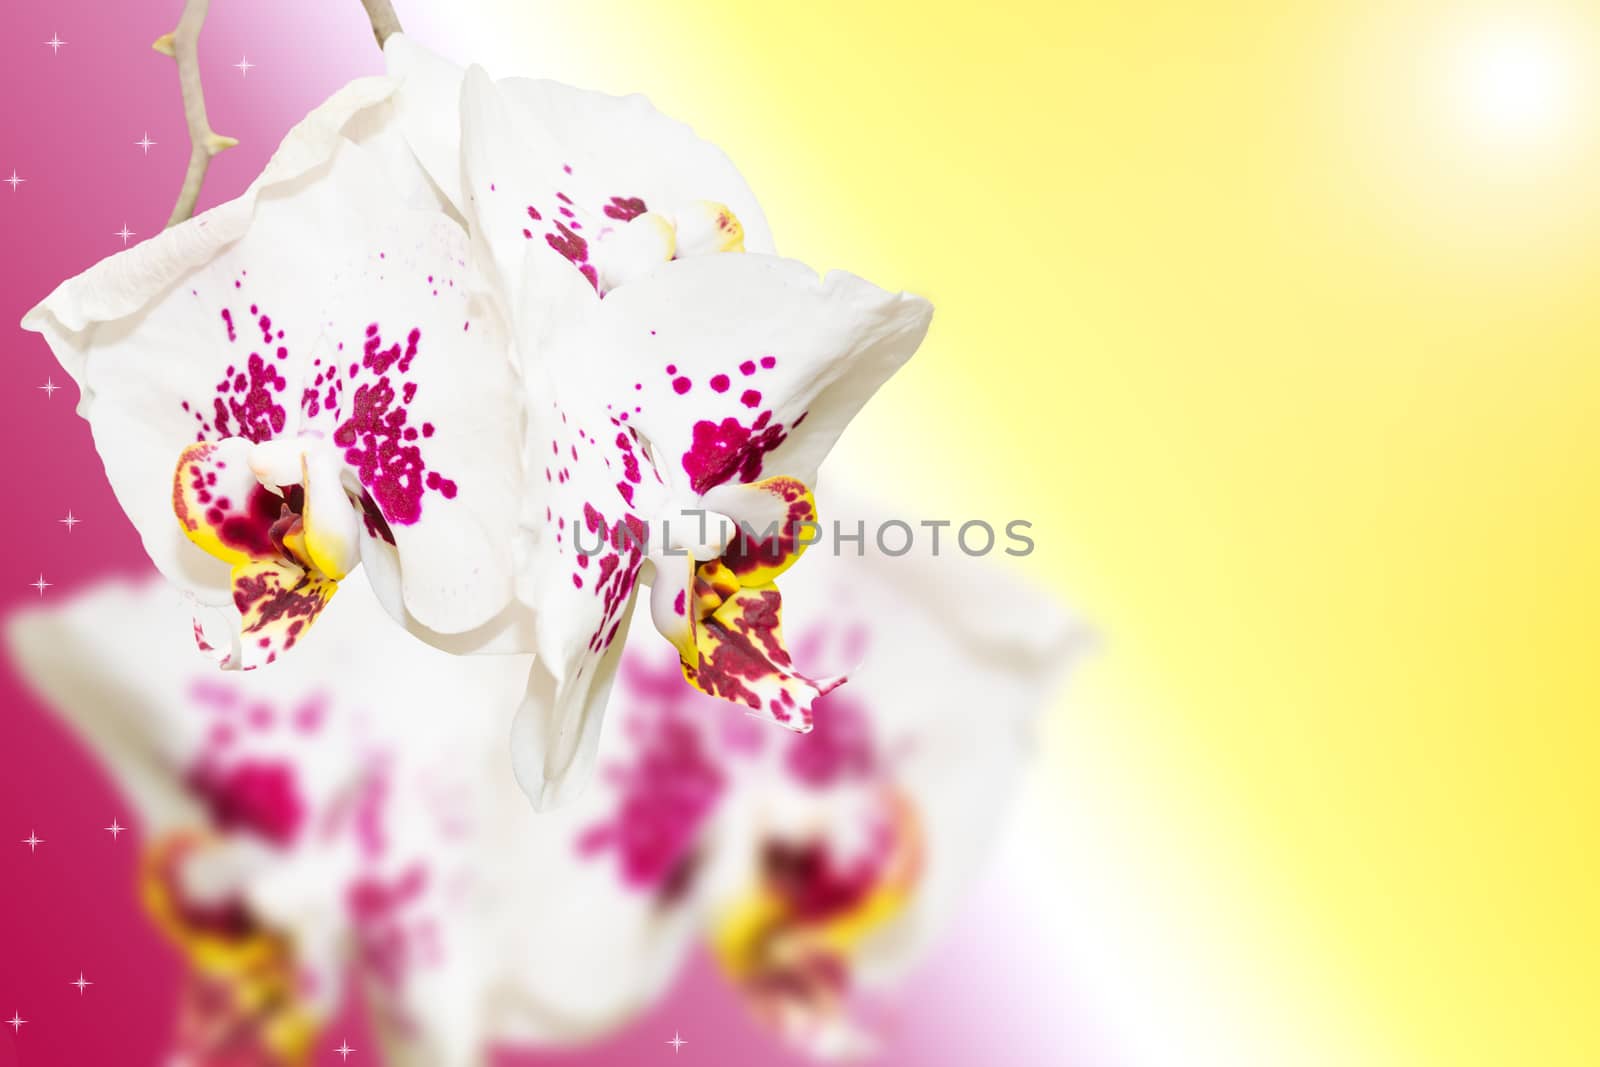 Purple white spotted orchid flowers on gradient blurred background with free copy-space area